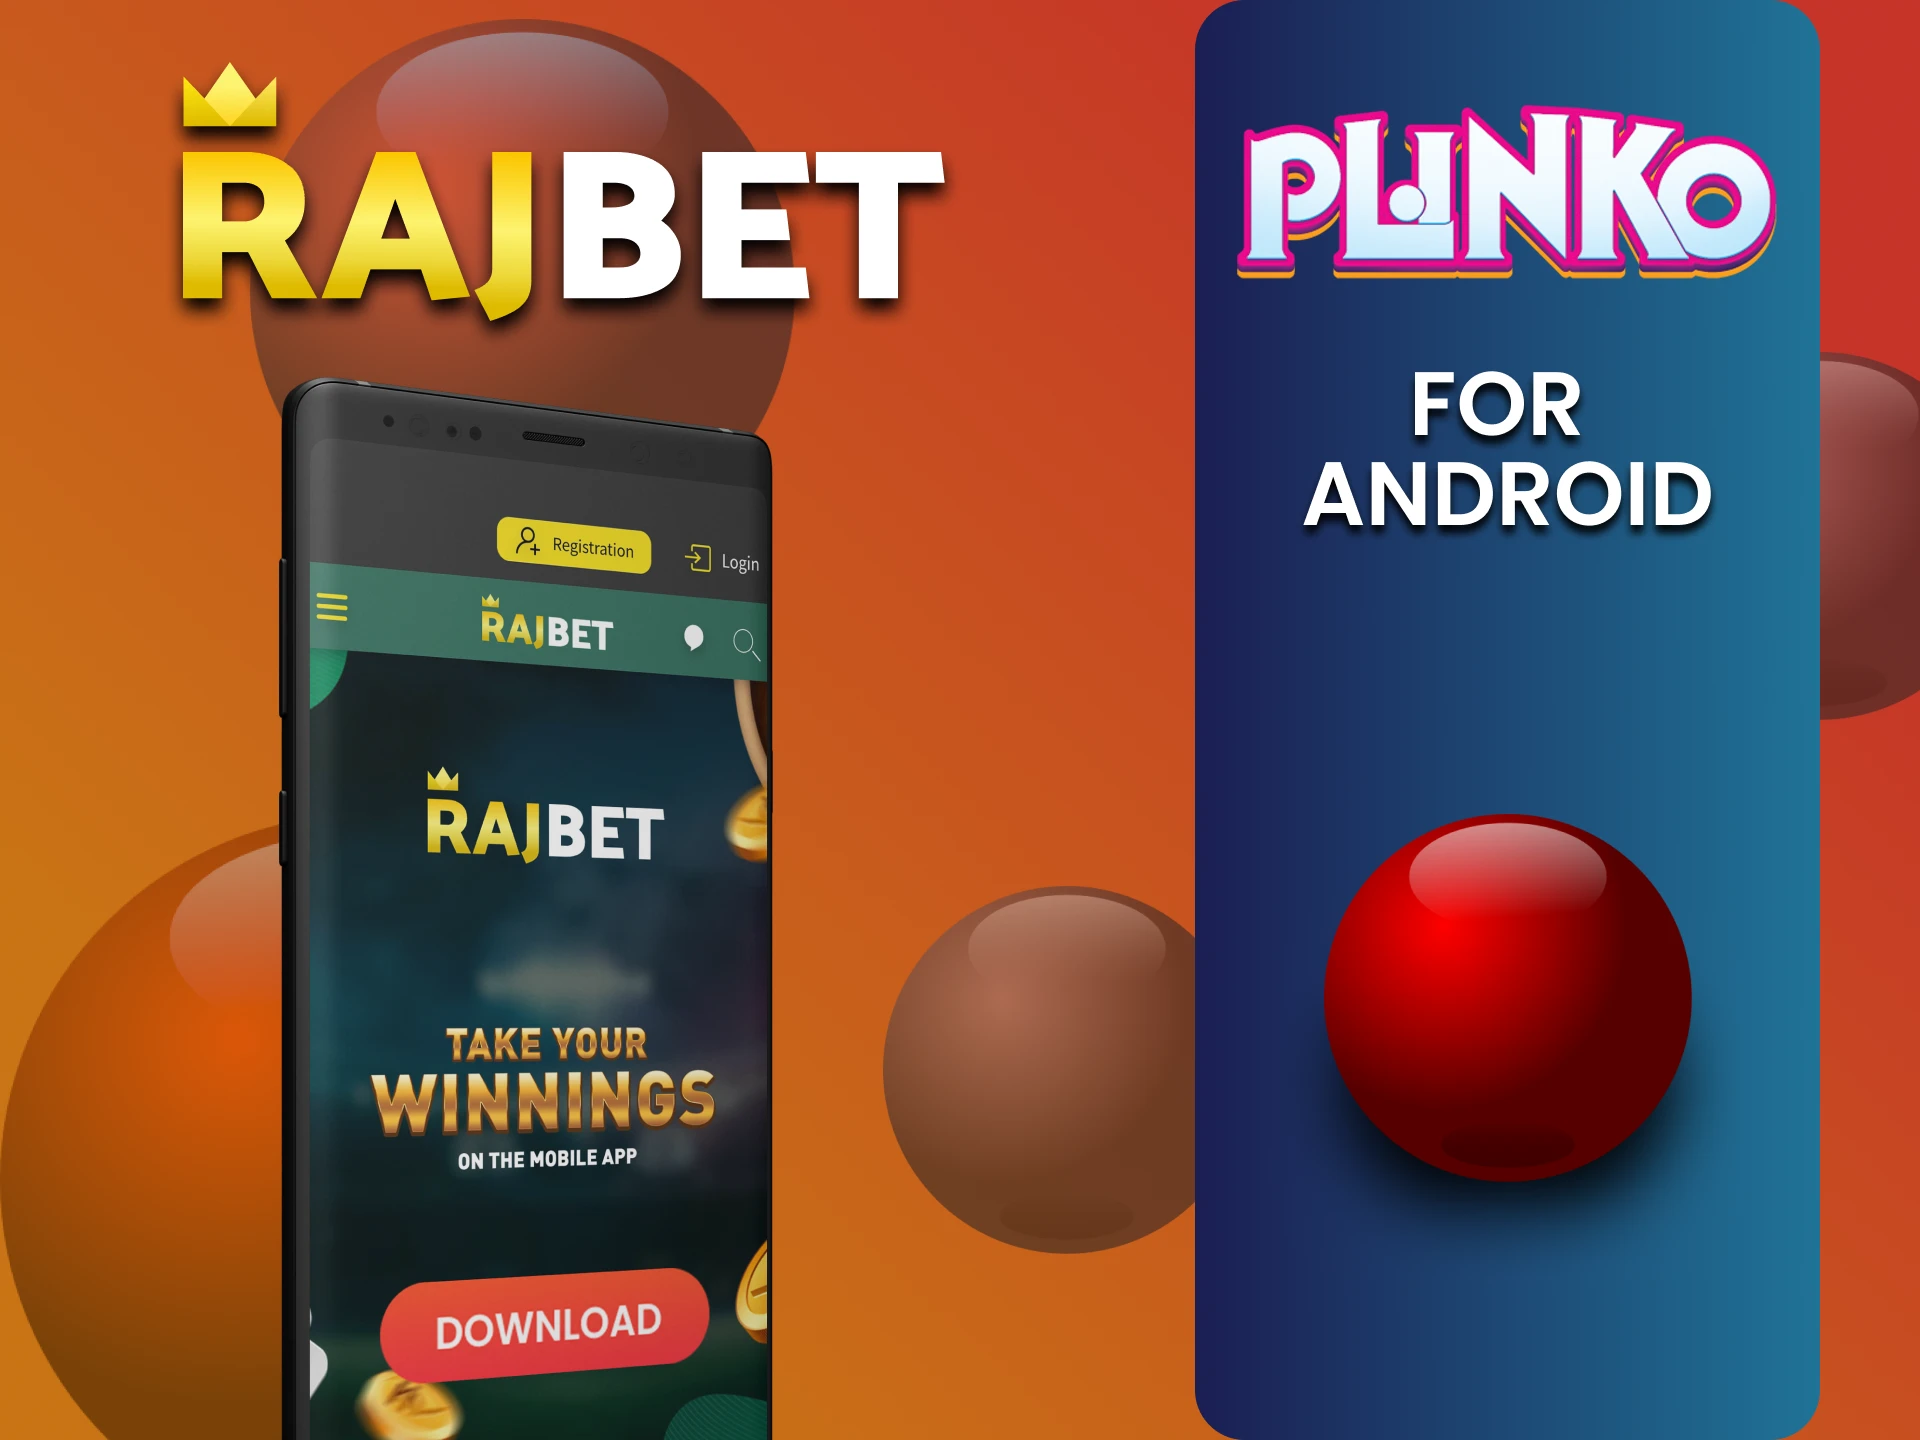 Install the Rajbet app on Android to play Plinko.